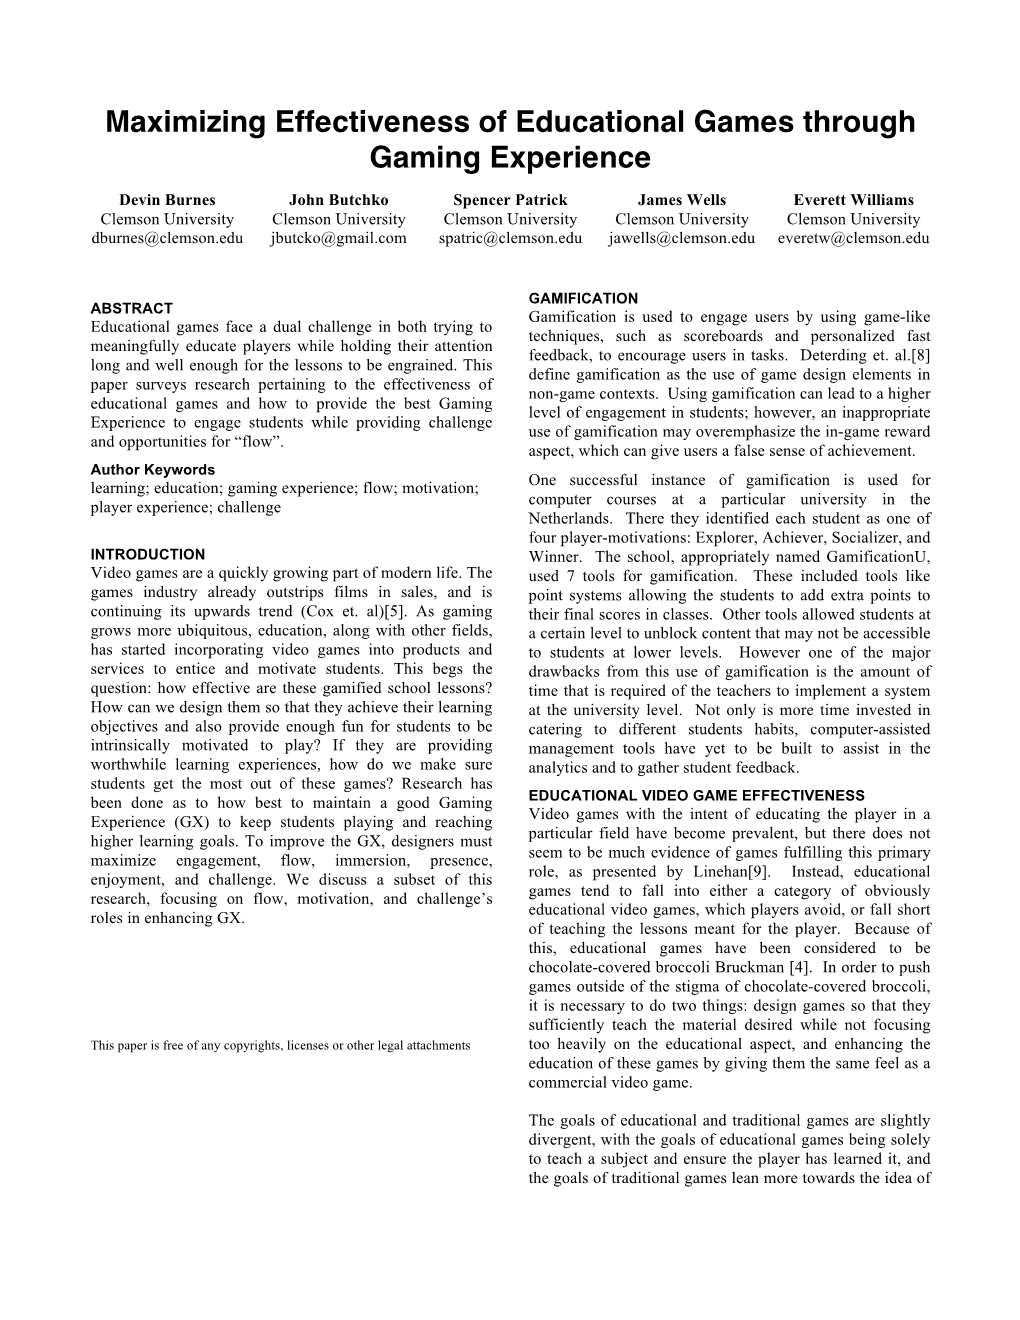 Maximizing Effectiveness of Educational Games Through Gaming Experience